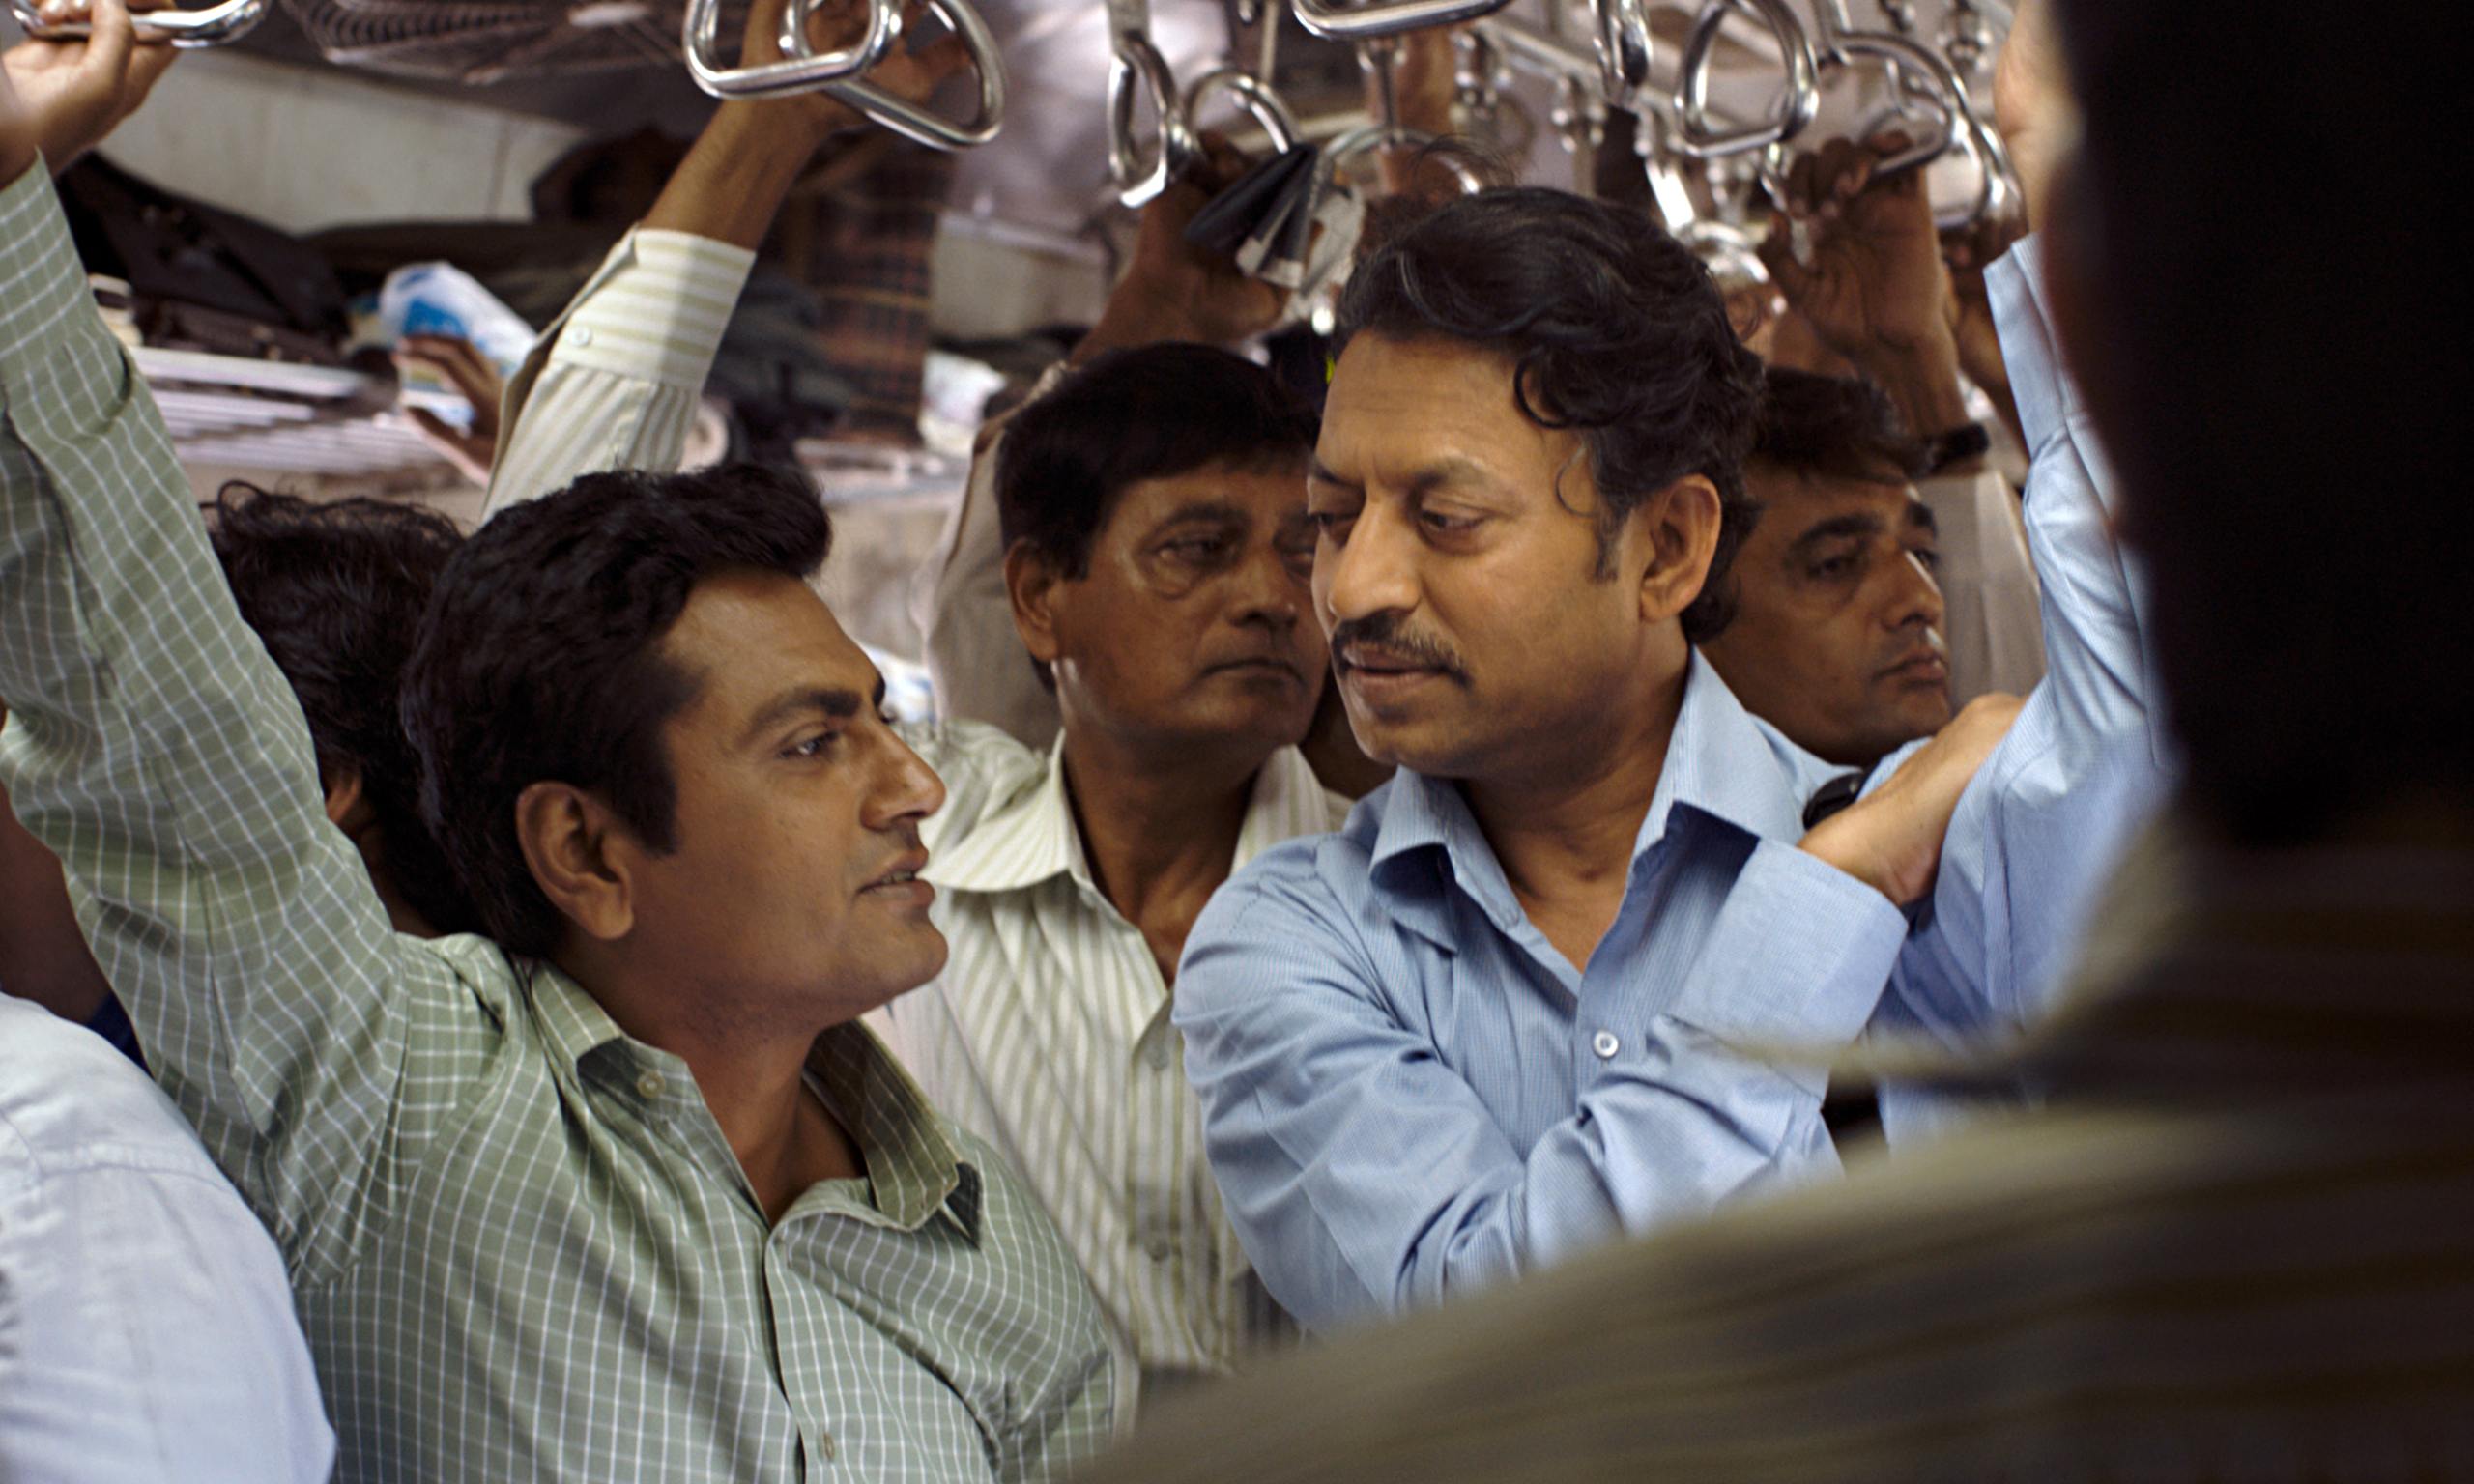 The Lunchbox director on India's new taste for realism | Film | The Guardian2560 x 1536